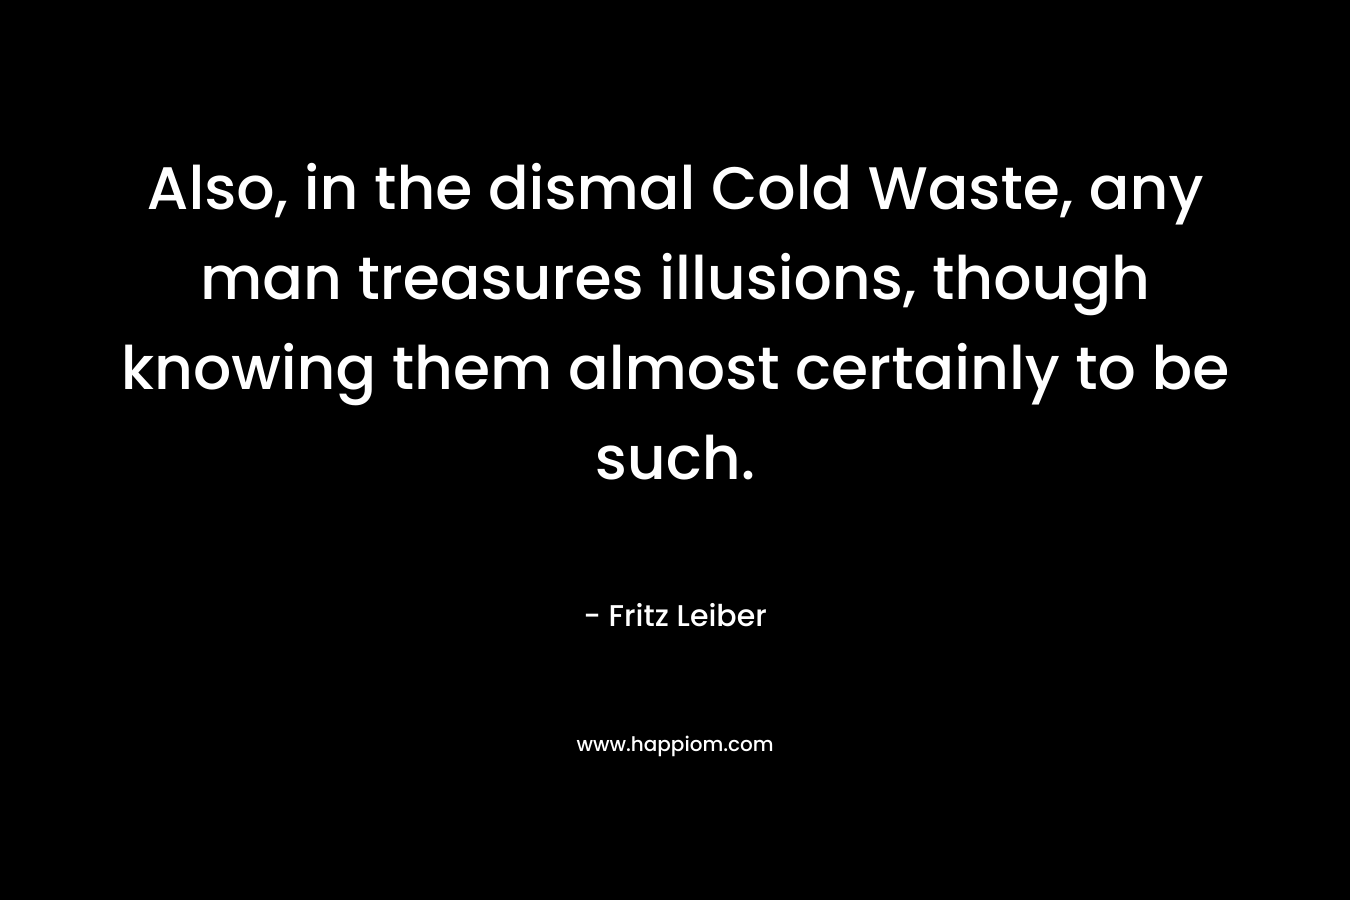 Also, in the dismal Cold Waste, any man treasures illusions, though knowing them almost certainly to be such. – Fritz Leiber